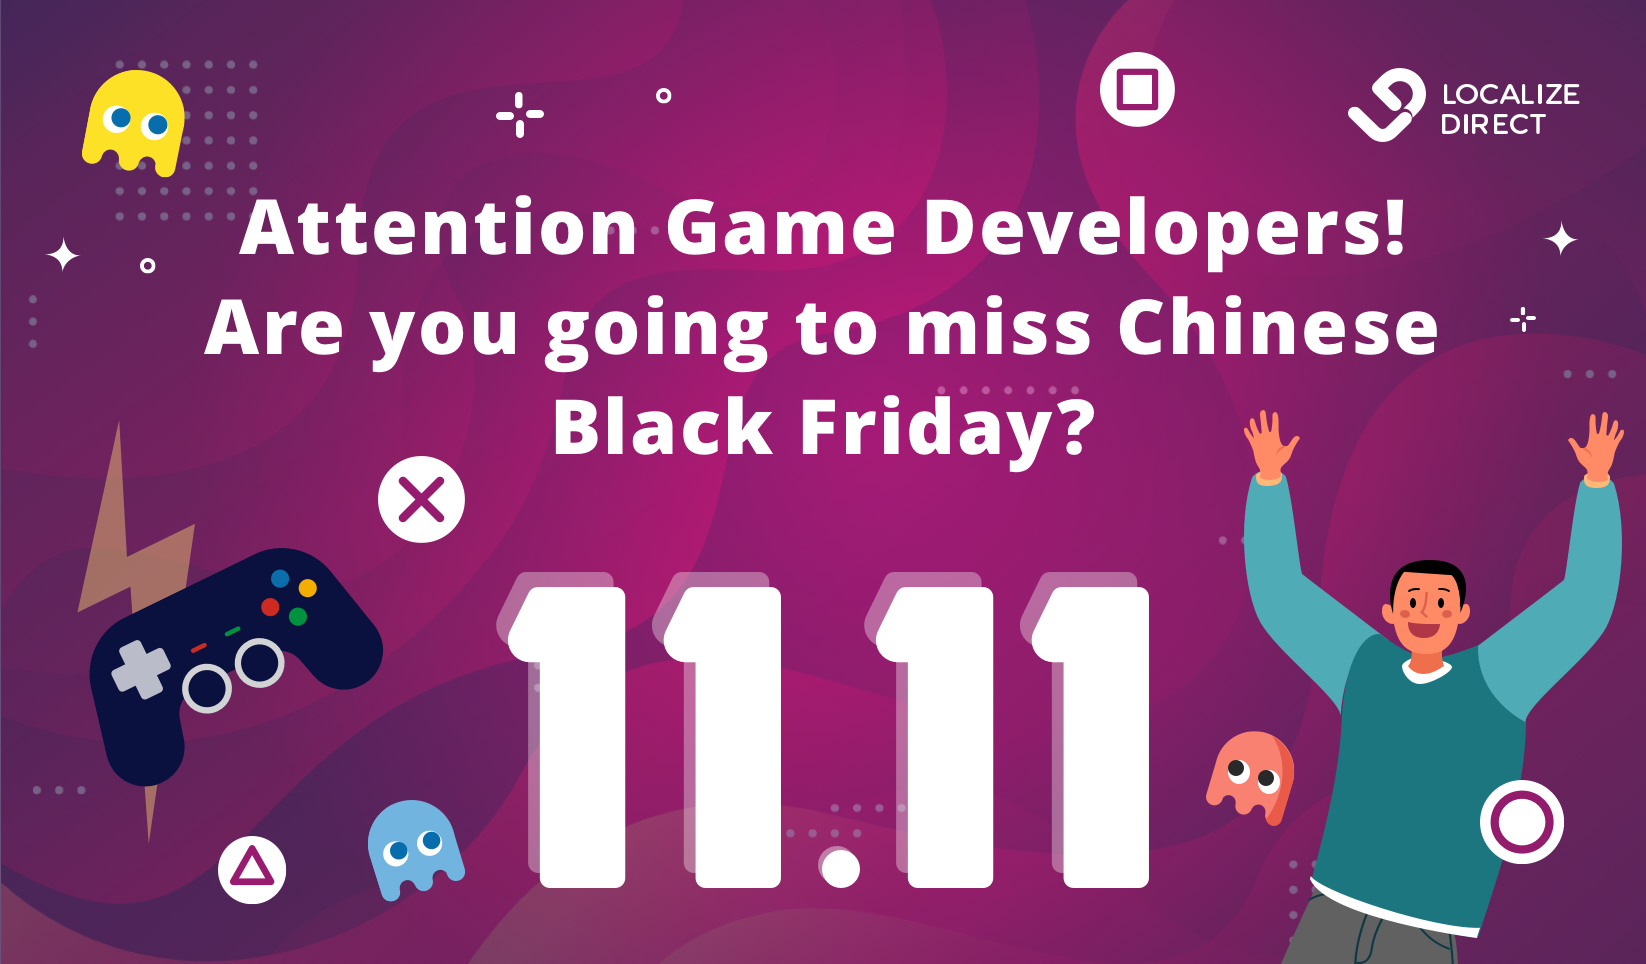 10 Actionable Tips For Your Chinese Video Game During Singles' Day